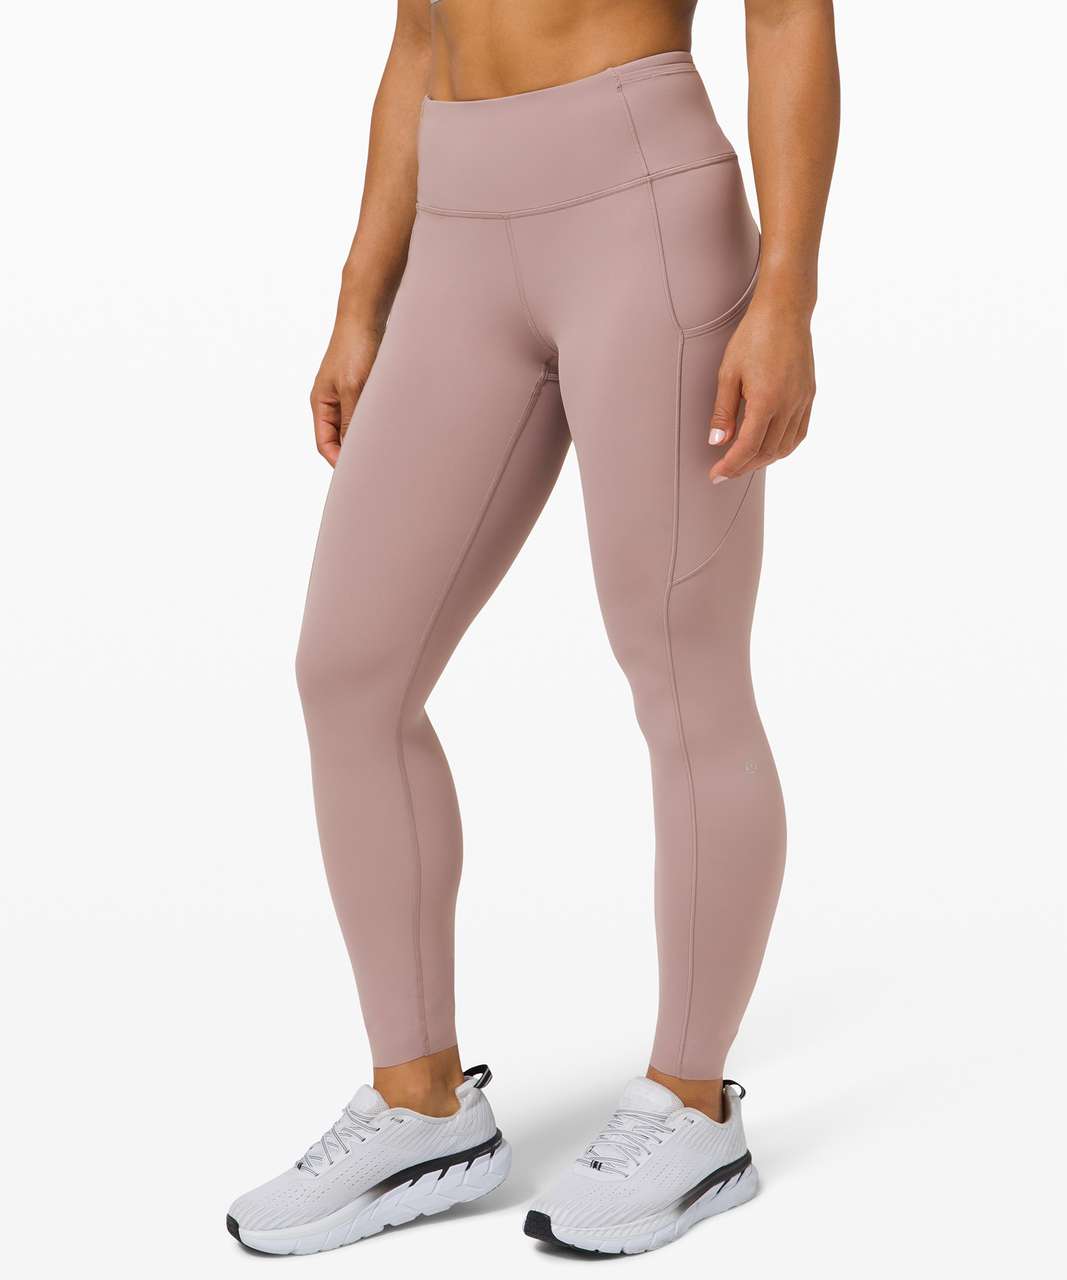 Lululemon Fast and Free High-Rise Tight 28" *Non-Reflective Brushed Nulux - Violet Verbena